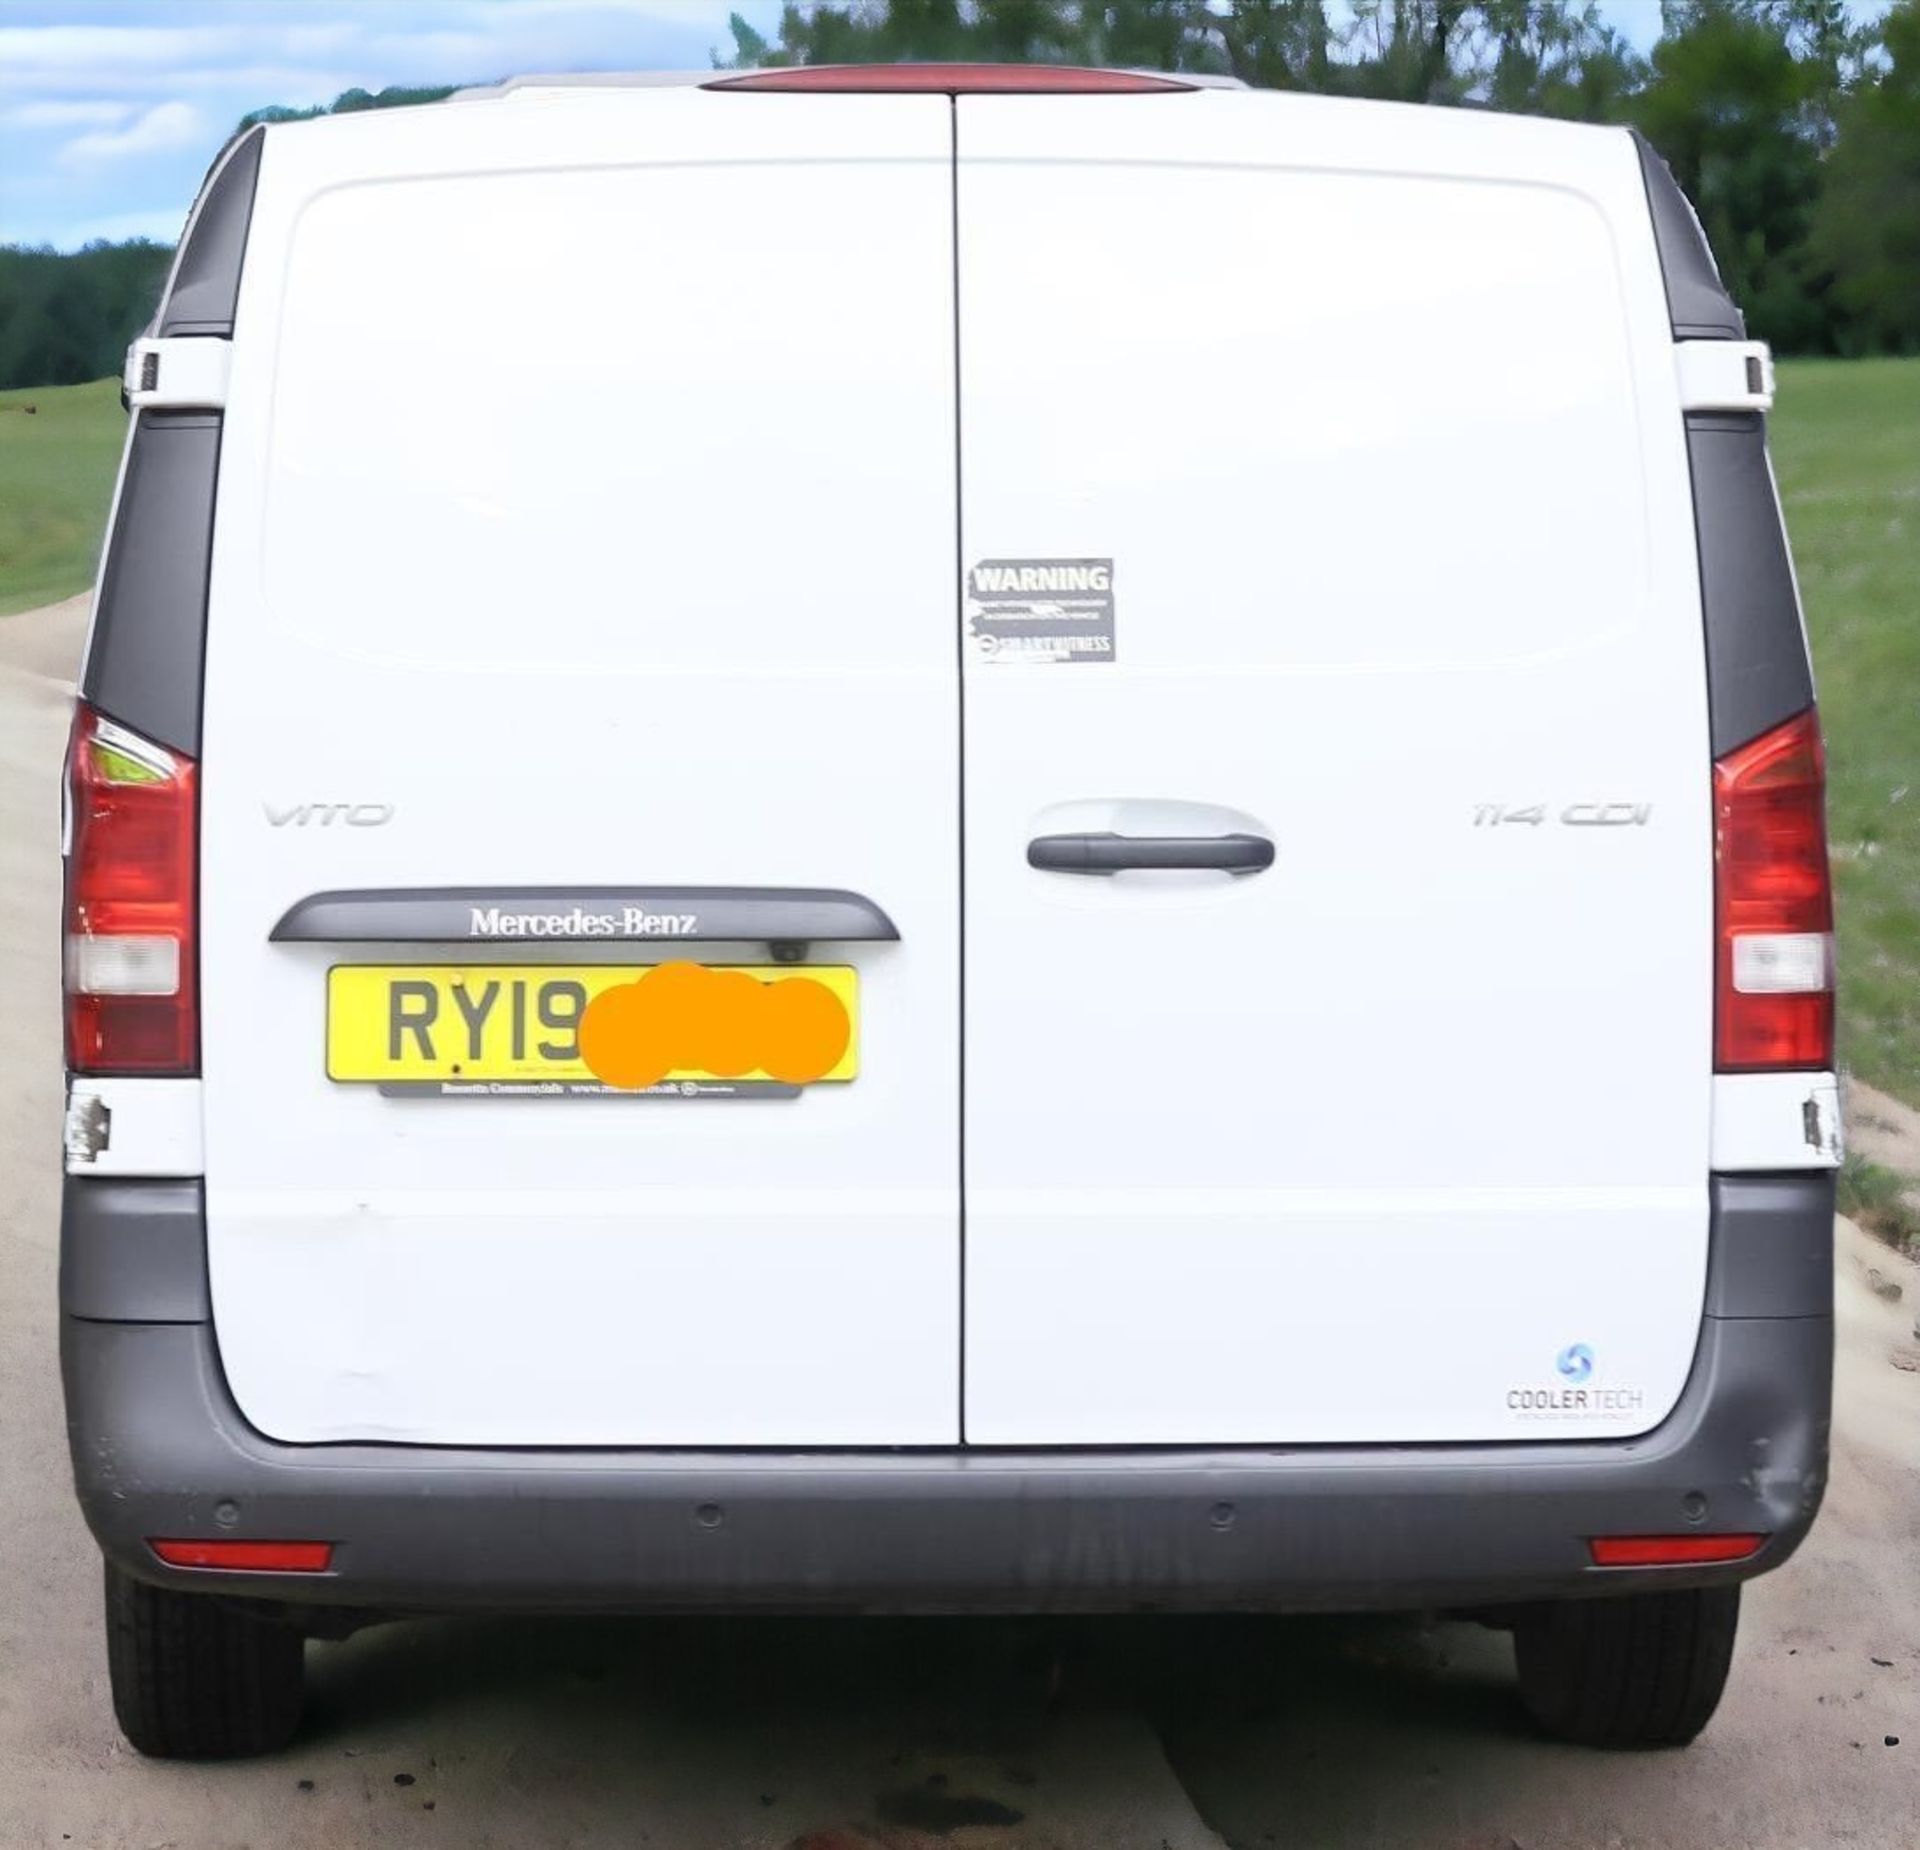 2019 MERCEDES BENZ VITO LWB FRIDGE VAN 114 CDI - YOUR RELIABLE REFRIGERATED SOLUTION - Image 2 of 12